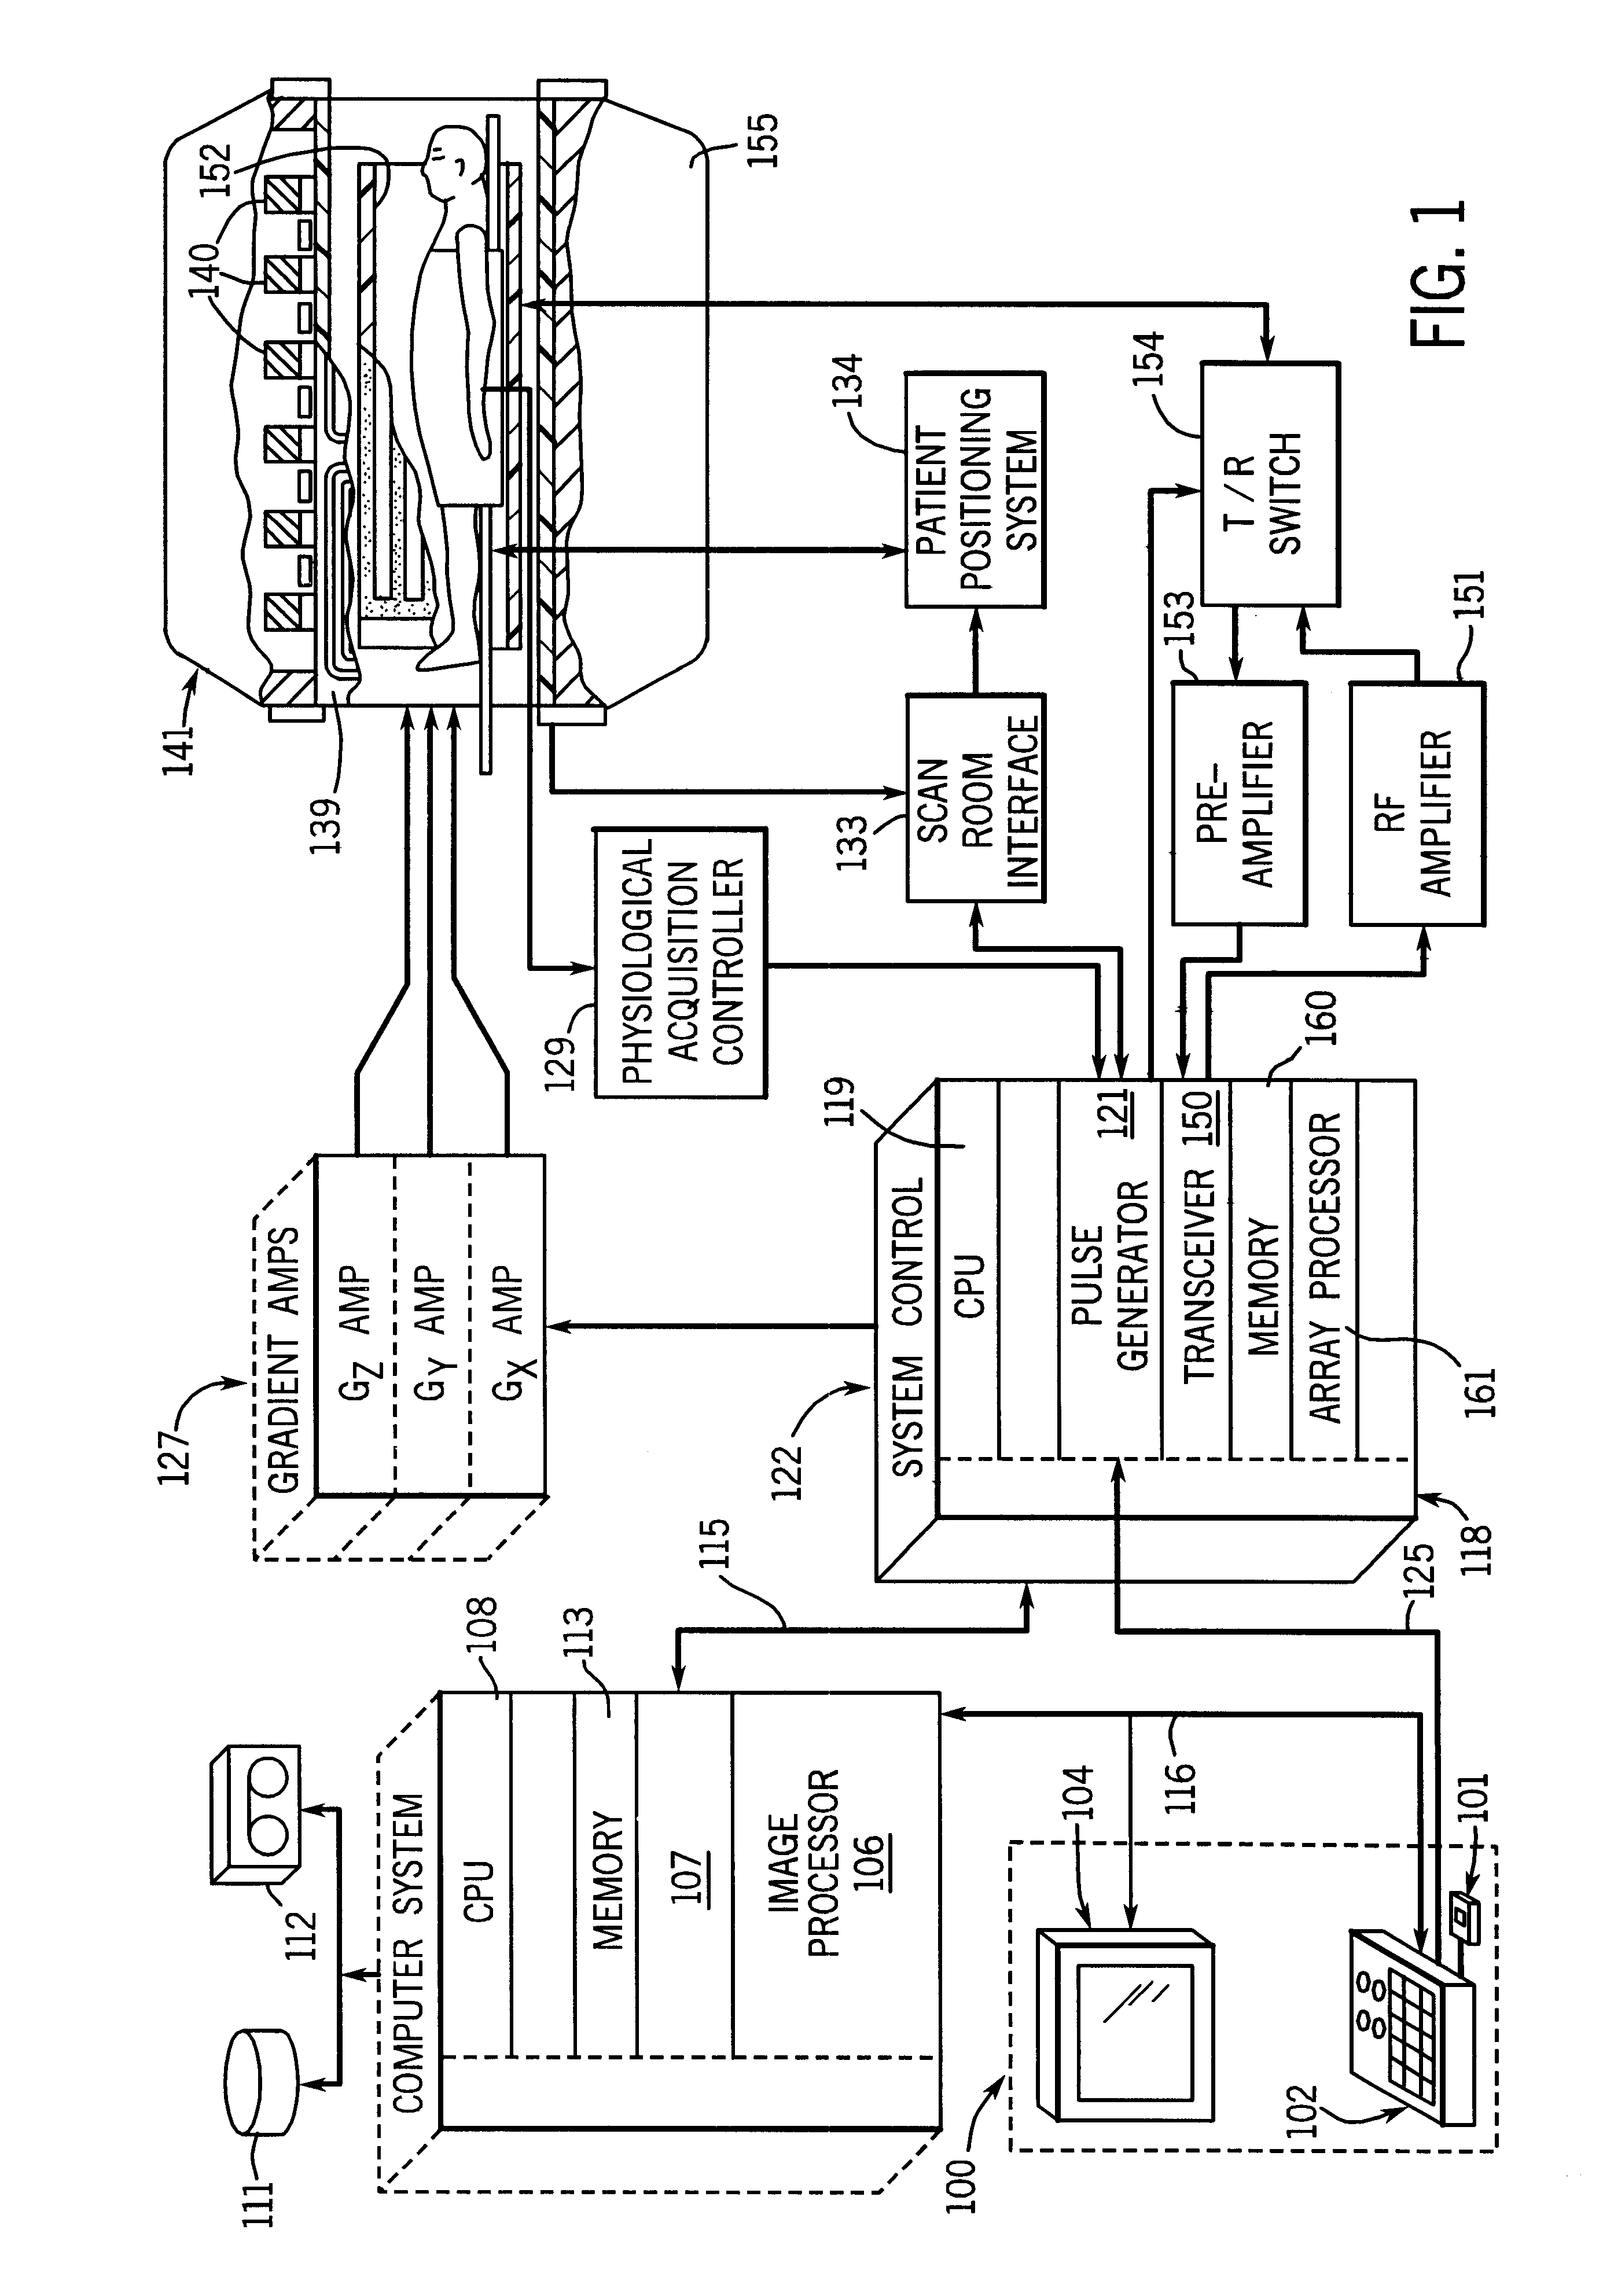 System and method for interactive image contrast control in a magnetic resonance imaging system